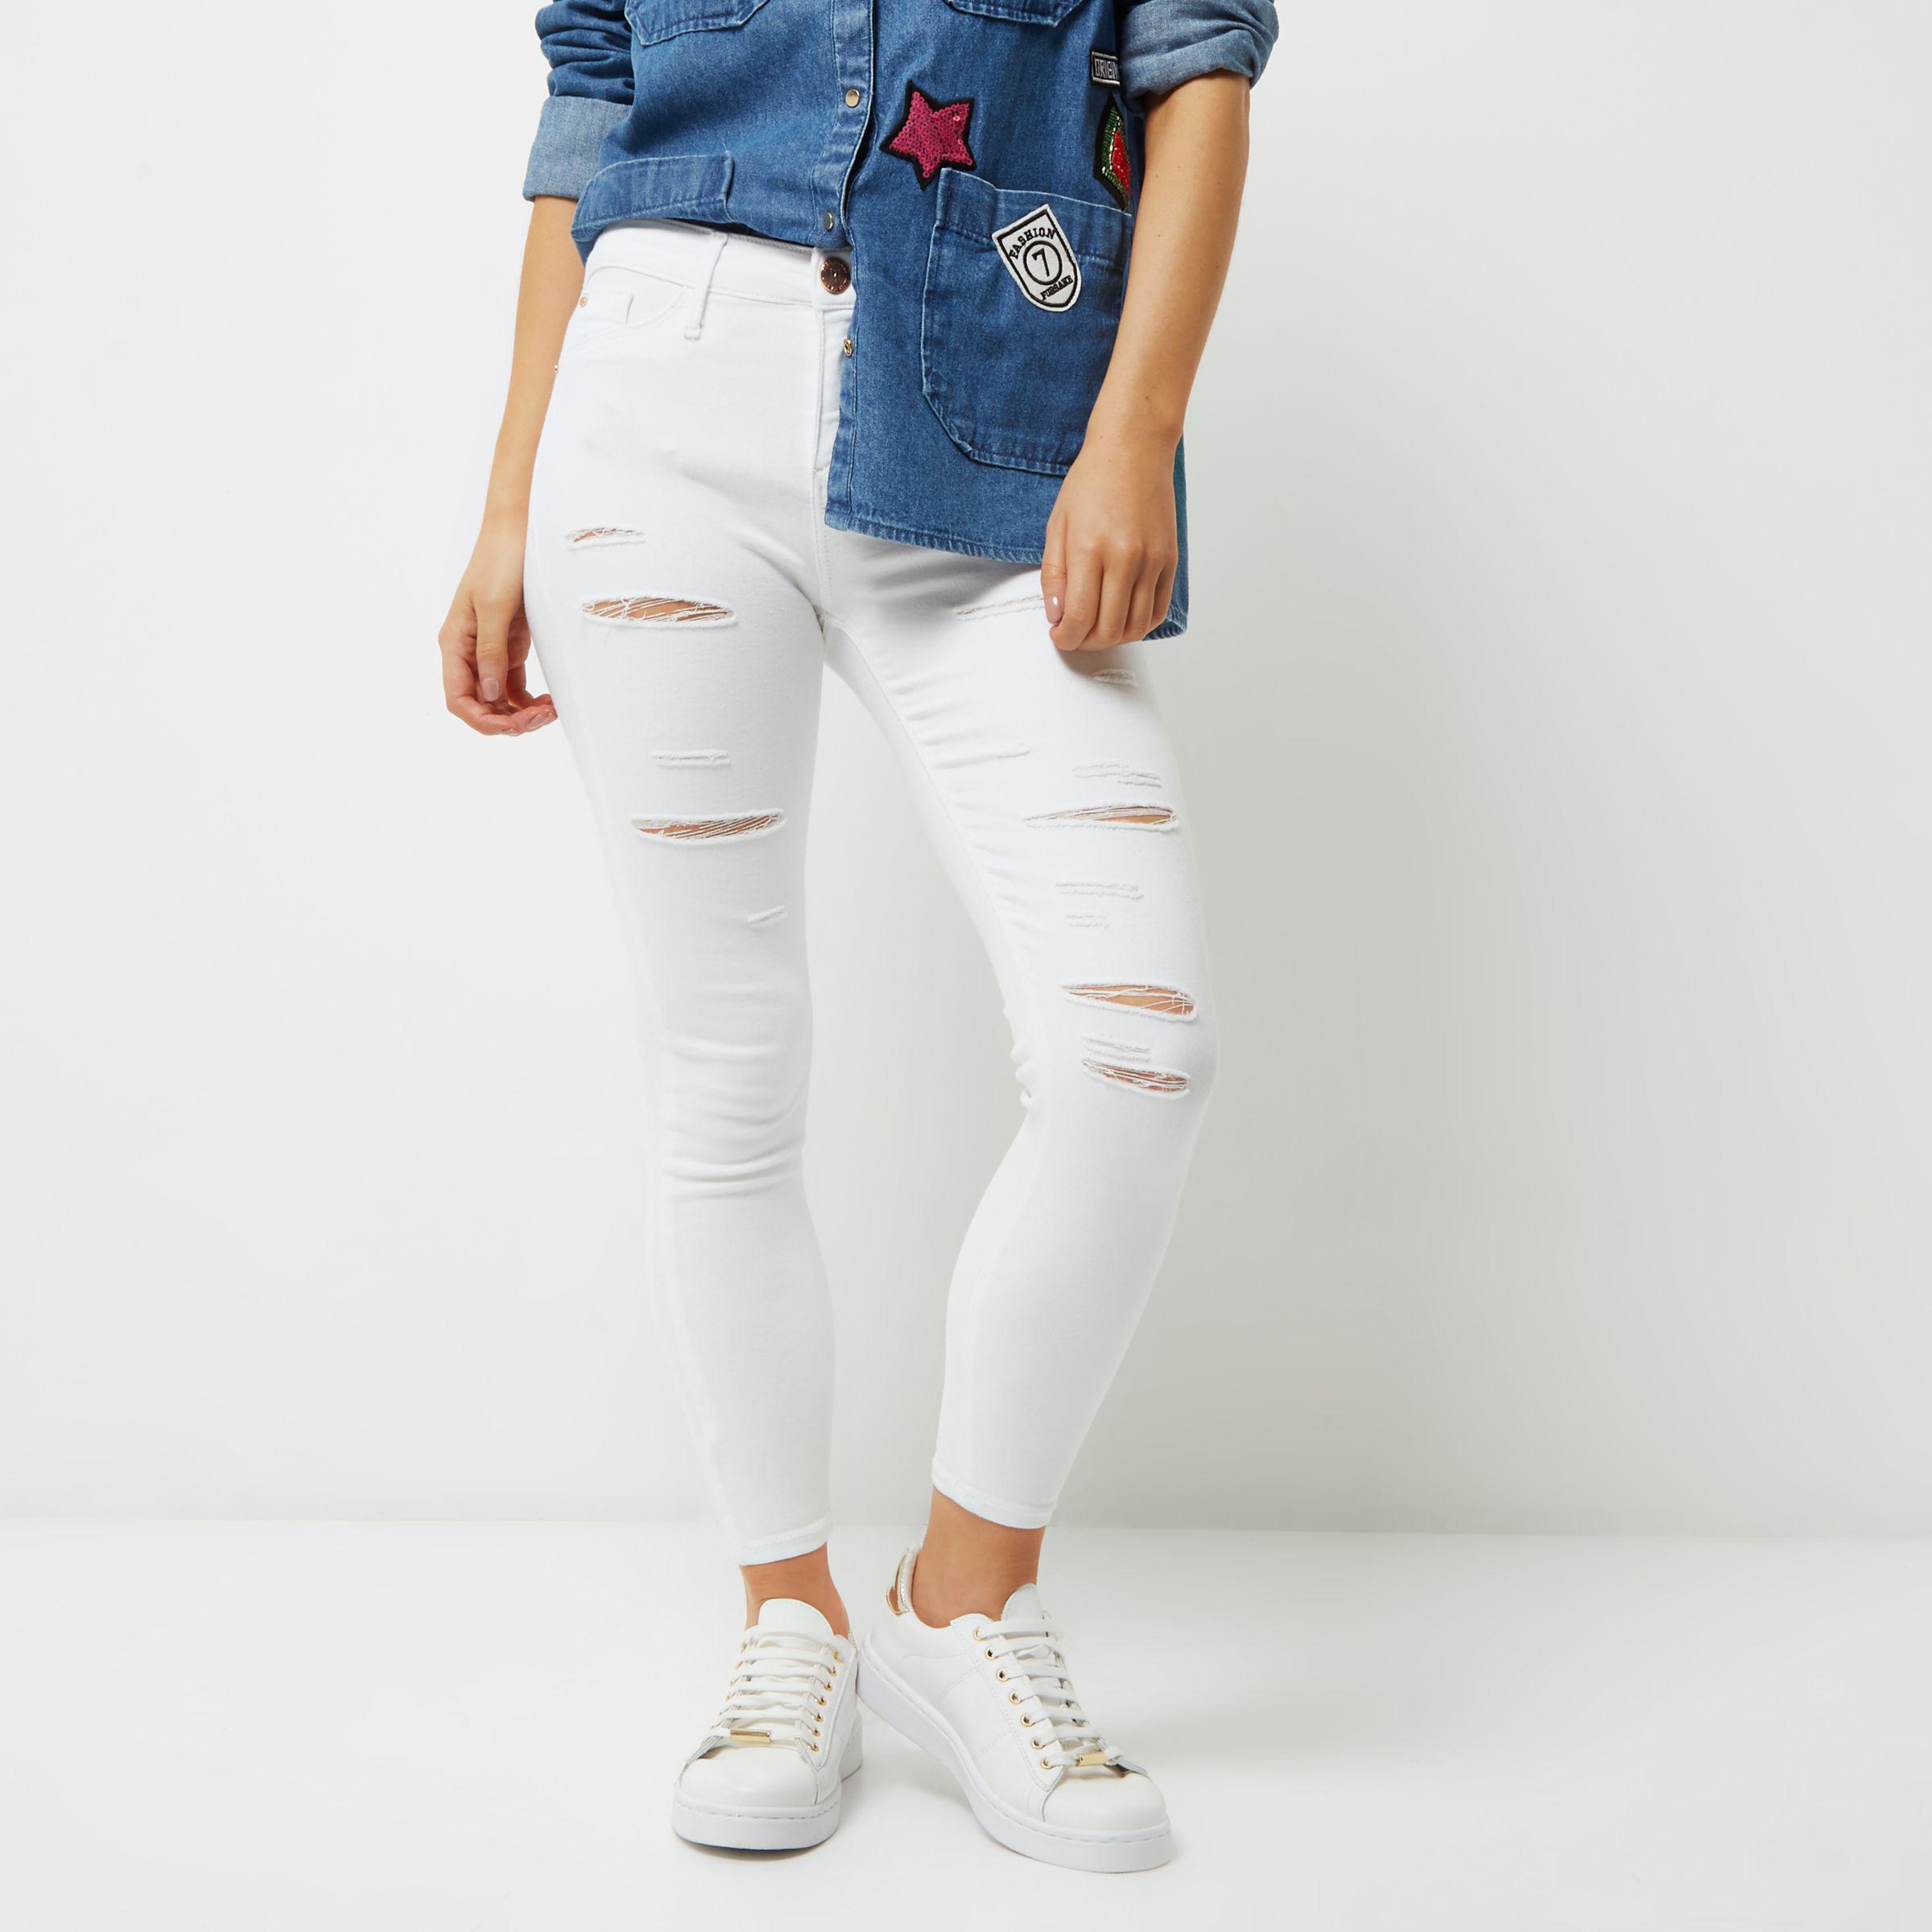 river island white ripped jeans for Sale OFF 65%